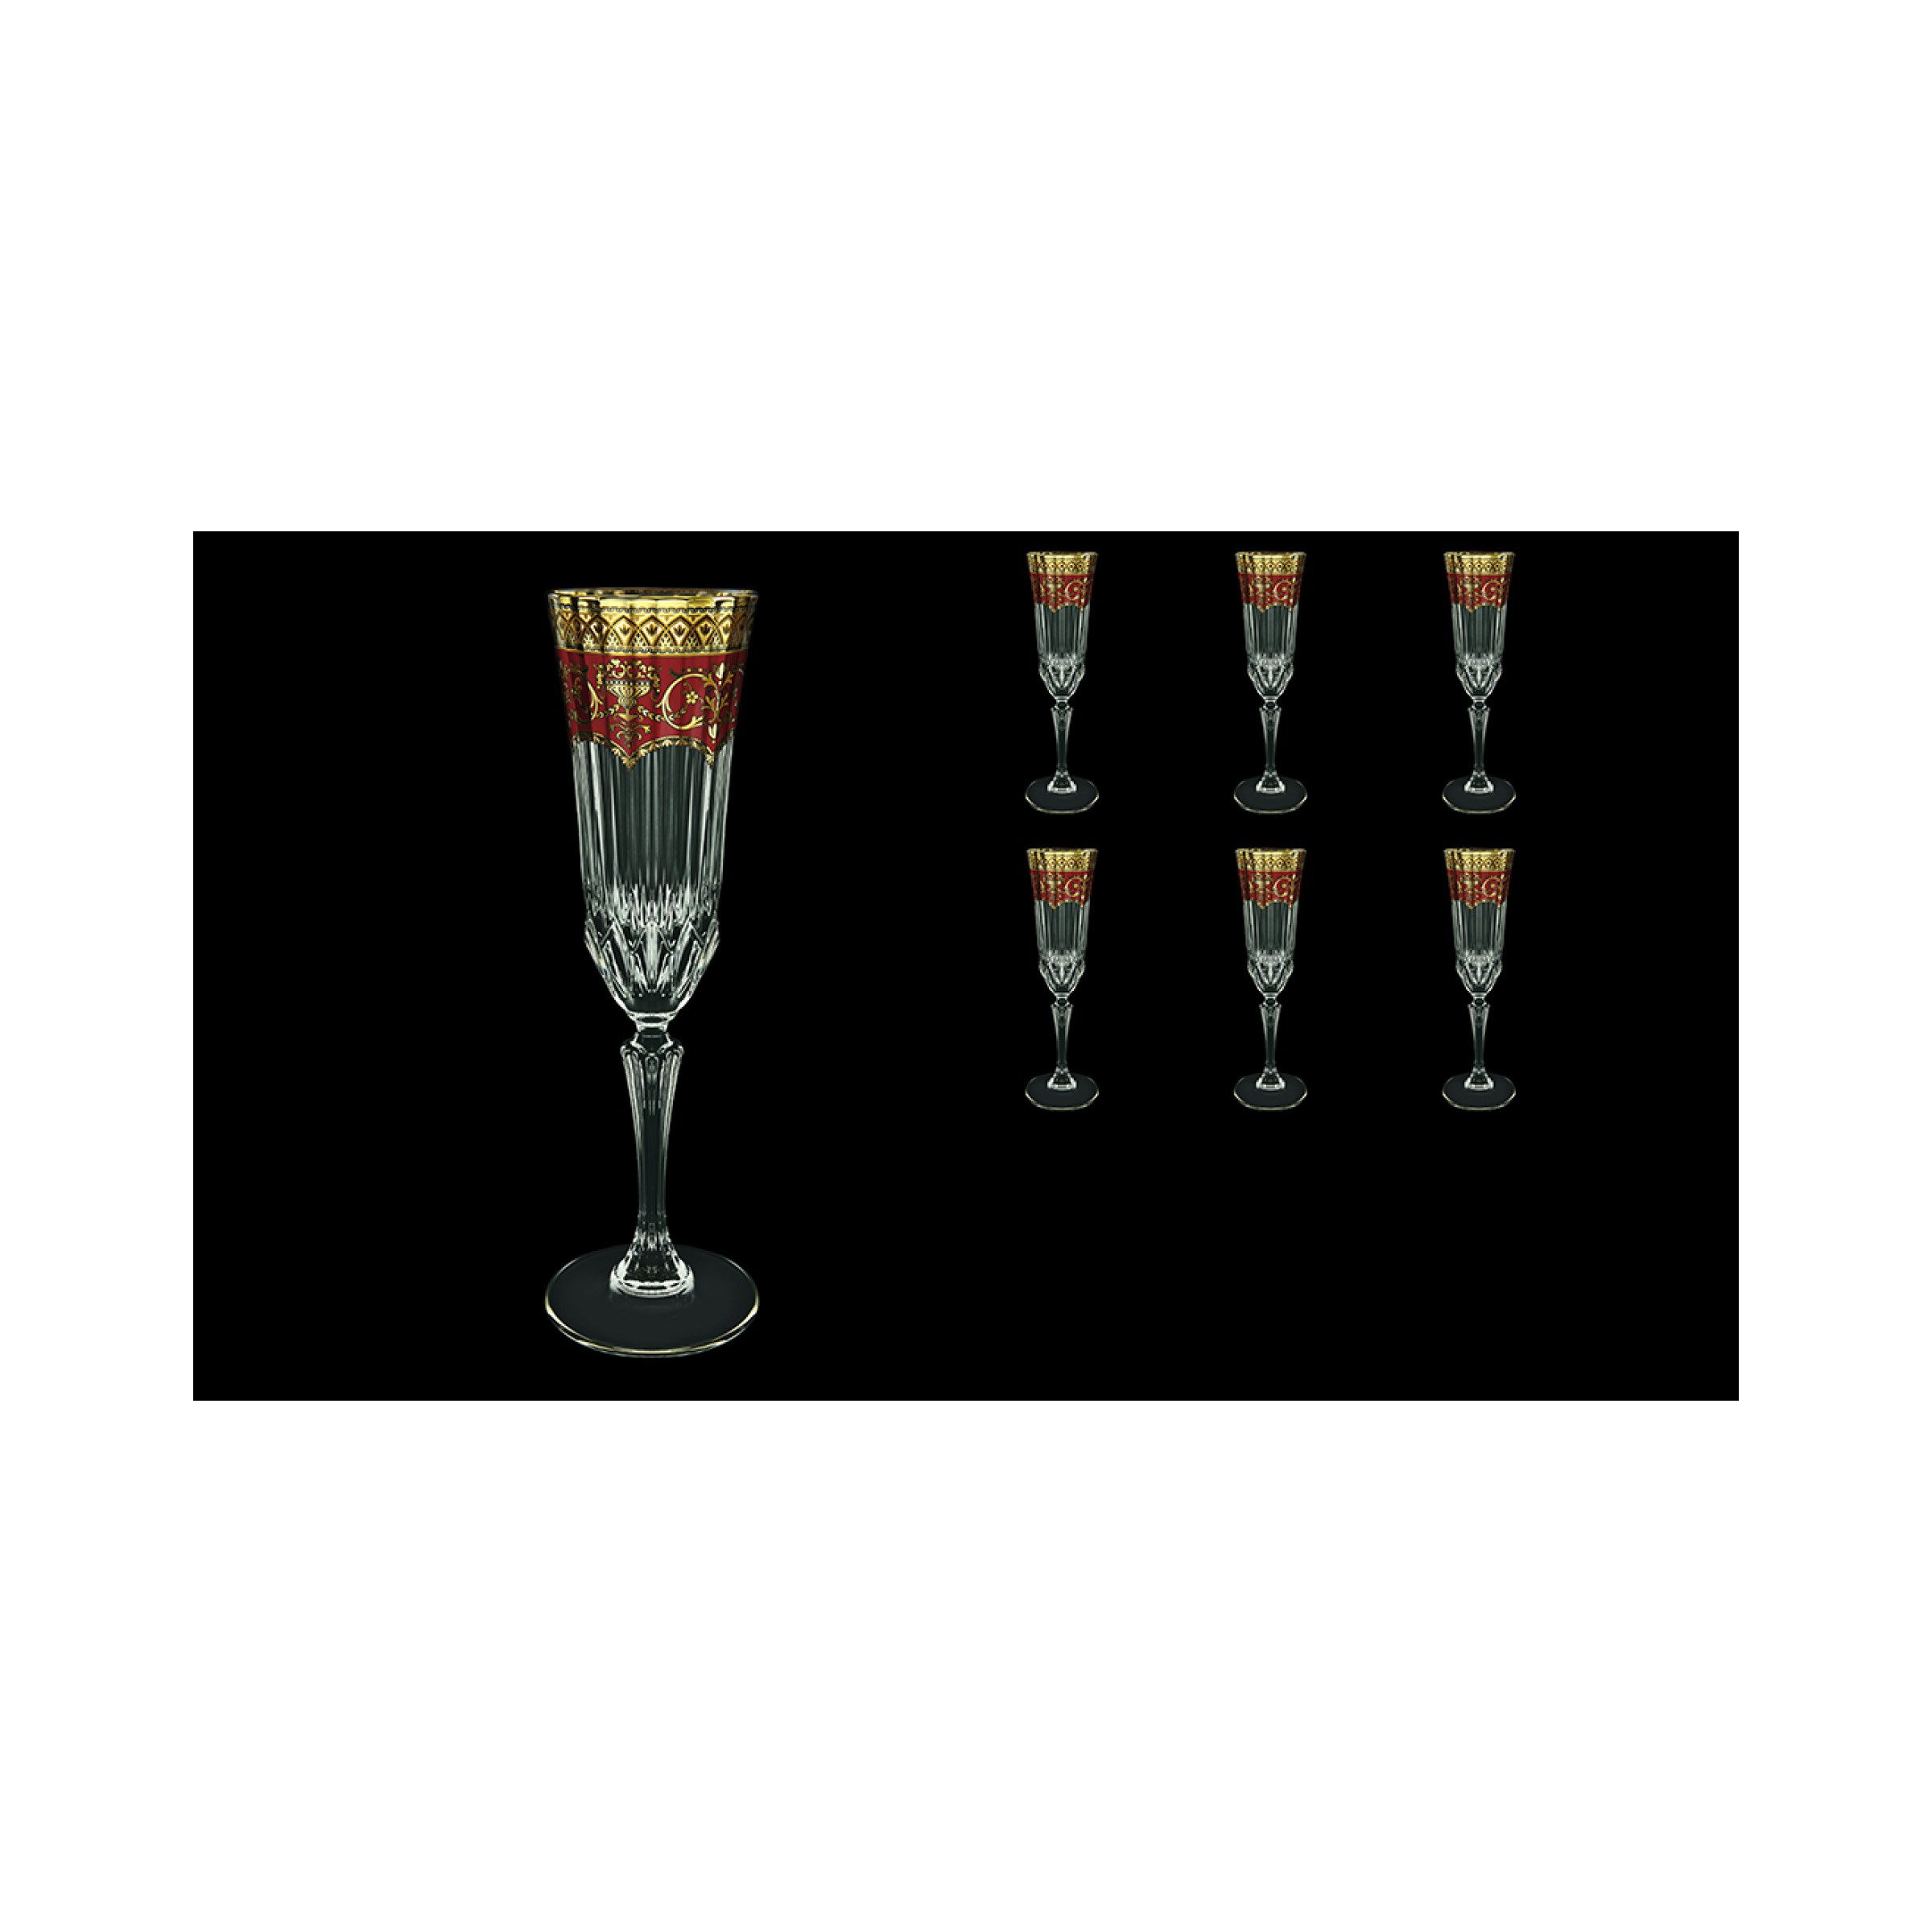 10 Unique Champagne Flutes with Vase Holder 2024 free download champagne flutes with vase holder of adagio cfl aegr champagne flutes 180ml 6pcs in floraas empire golden within adagio cfl aegr champagne flutes 180ml 6pcs in floraas empire golden red deco